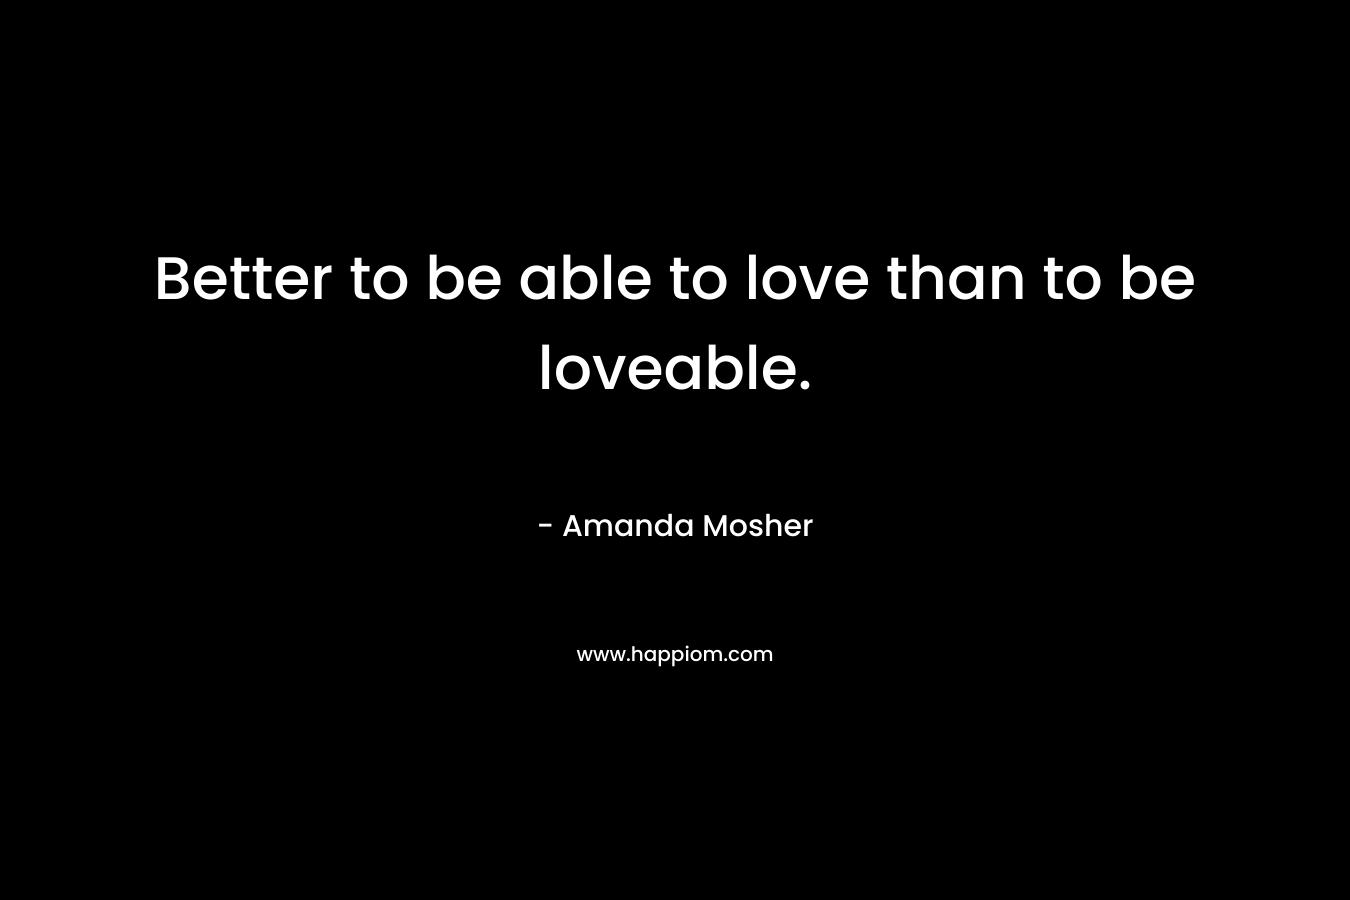 Better to be able to love than to be loveable. – Amanda Mosher